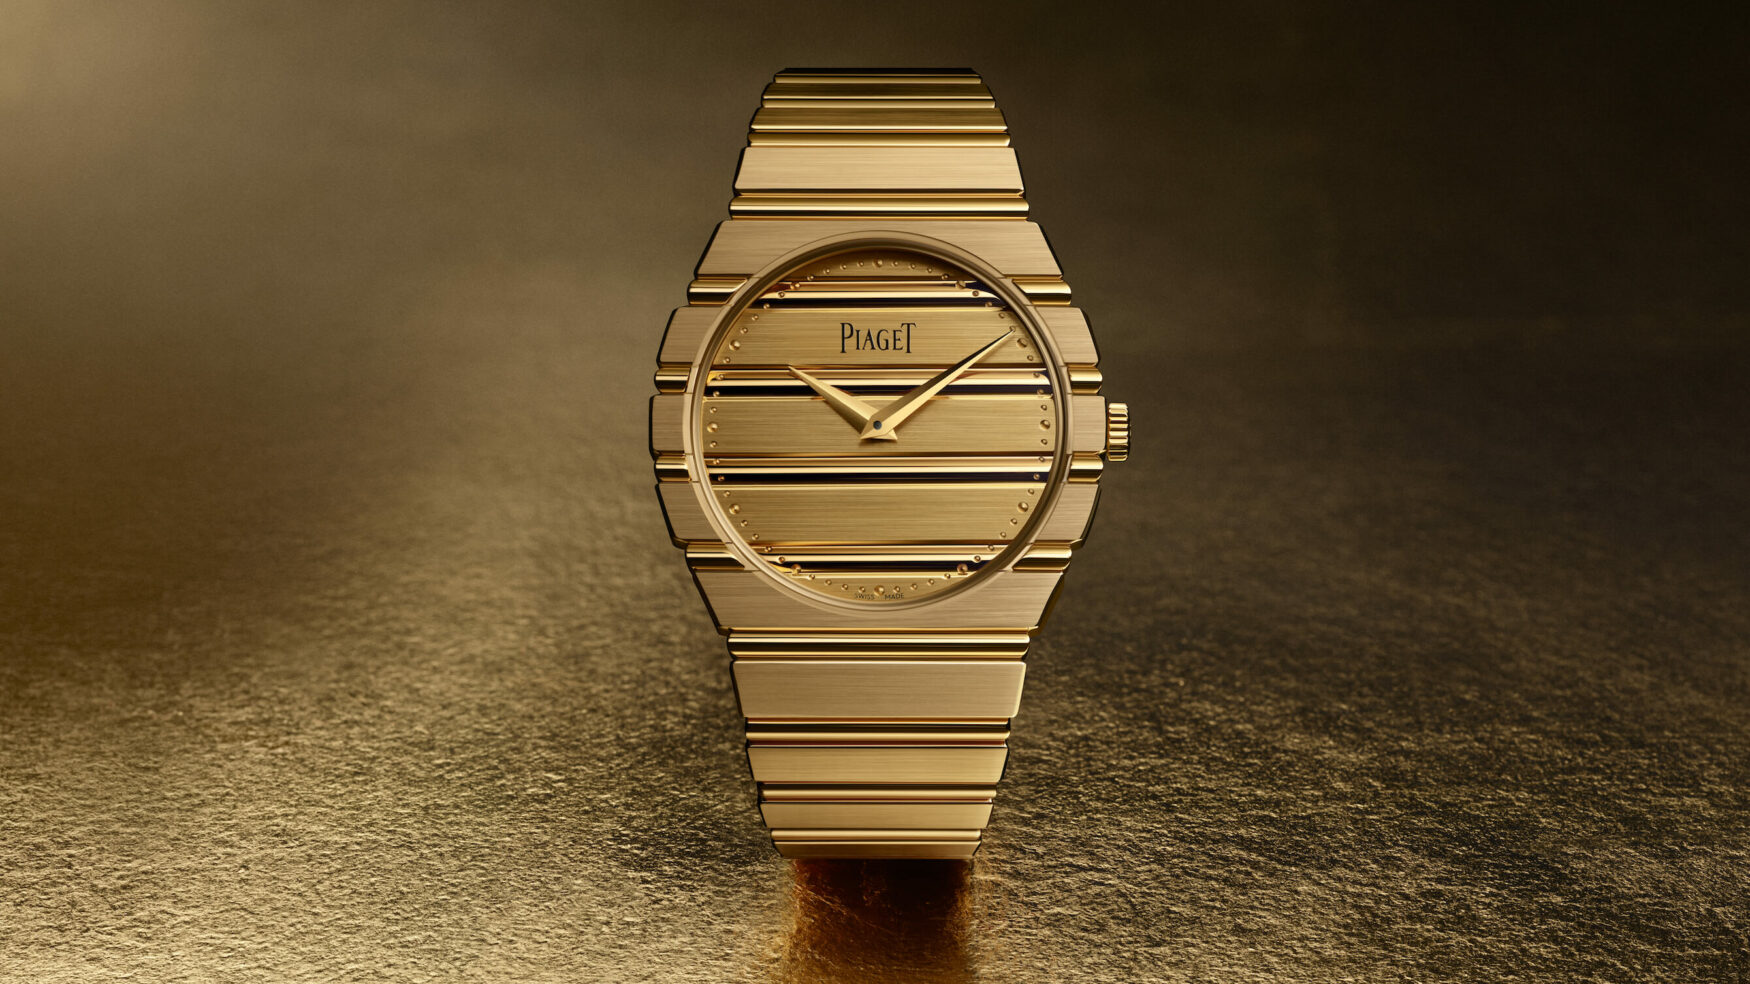 The new Piaget Polo 79 rivals beloved retro legends like the 222